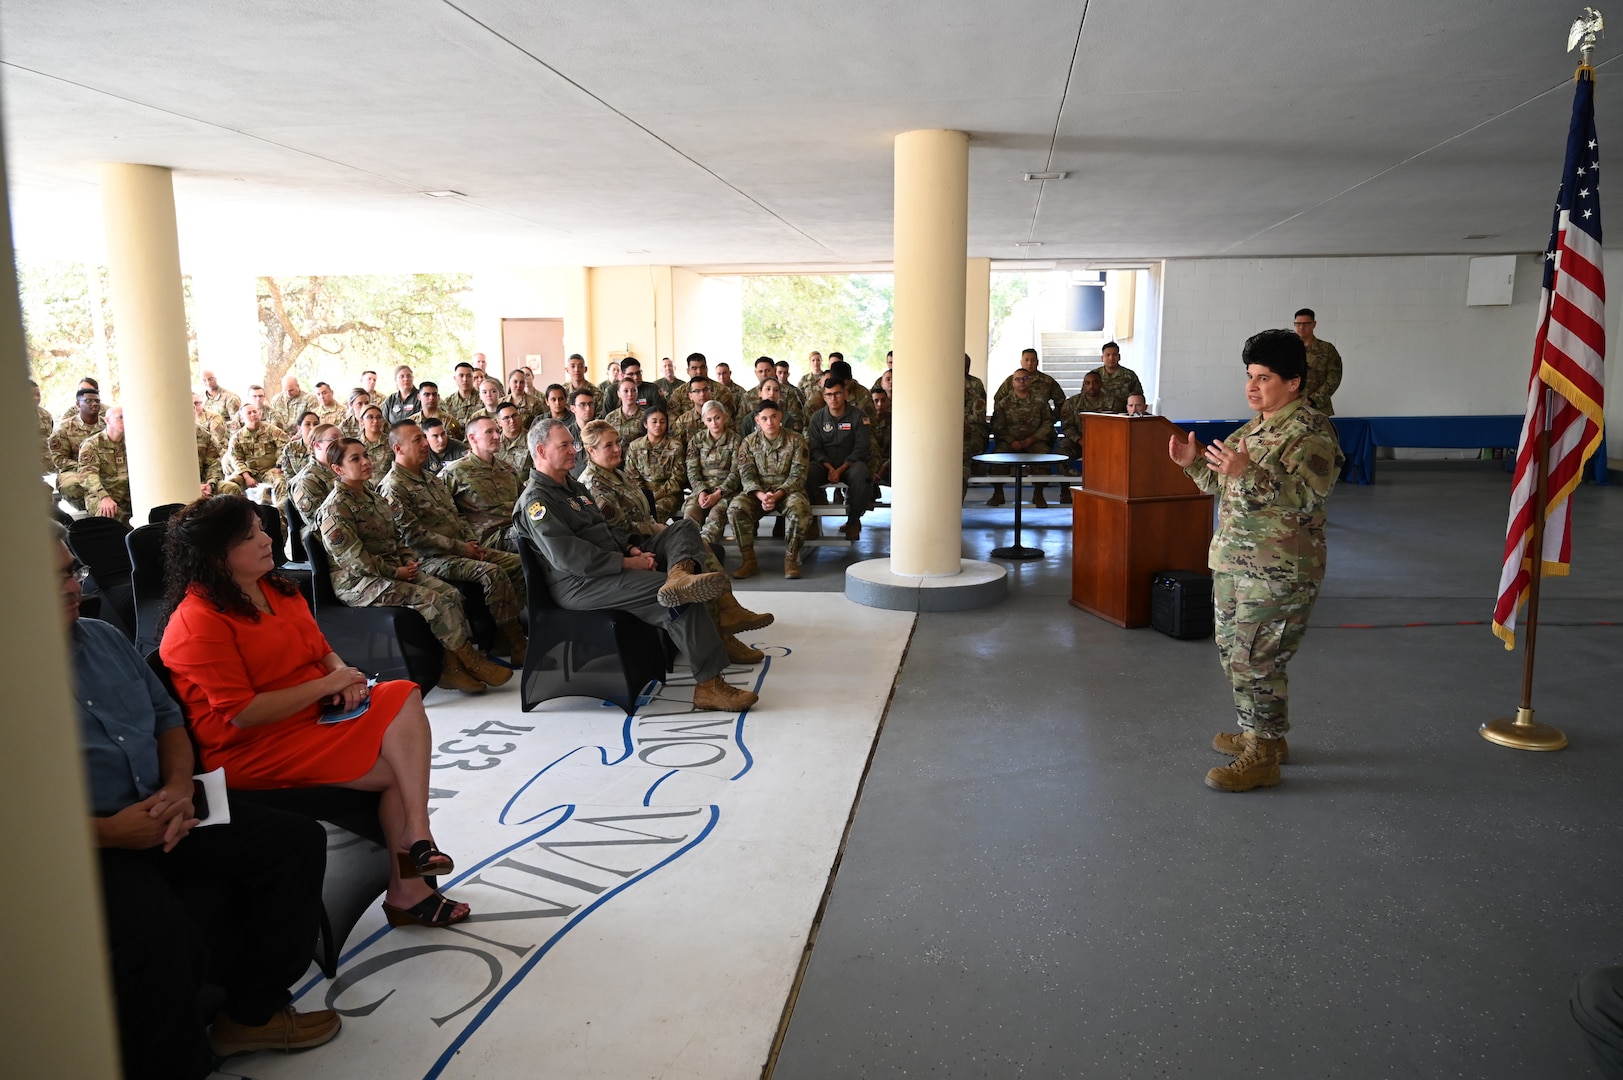 Col. Sylvia Fernandez speaks during an assumption of command ceremony at Joint Base San Antonio-Lackland, Texas, Nov. 5, 2022, where she assumed command of the 433rd Aeromedical Evacuation Squadron. The 433rd AES provides aeromedical evacuation support when events like natural disasters and conflict occur, or anytime routine medical transportation by air is required. (U.S. Air Force photo by Tech. Sgt. Mike Lahrman)